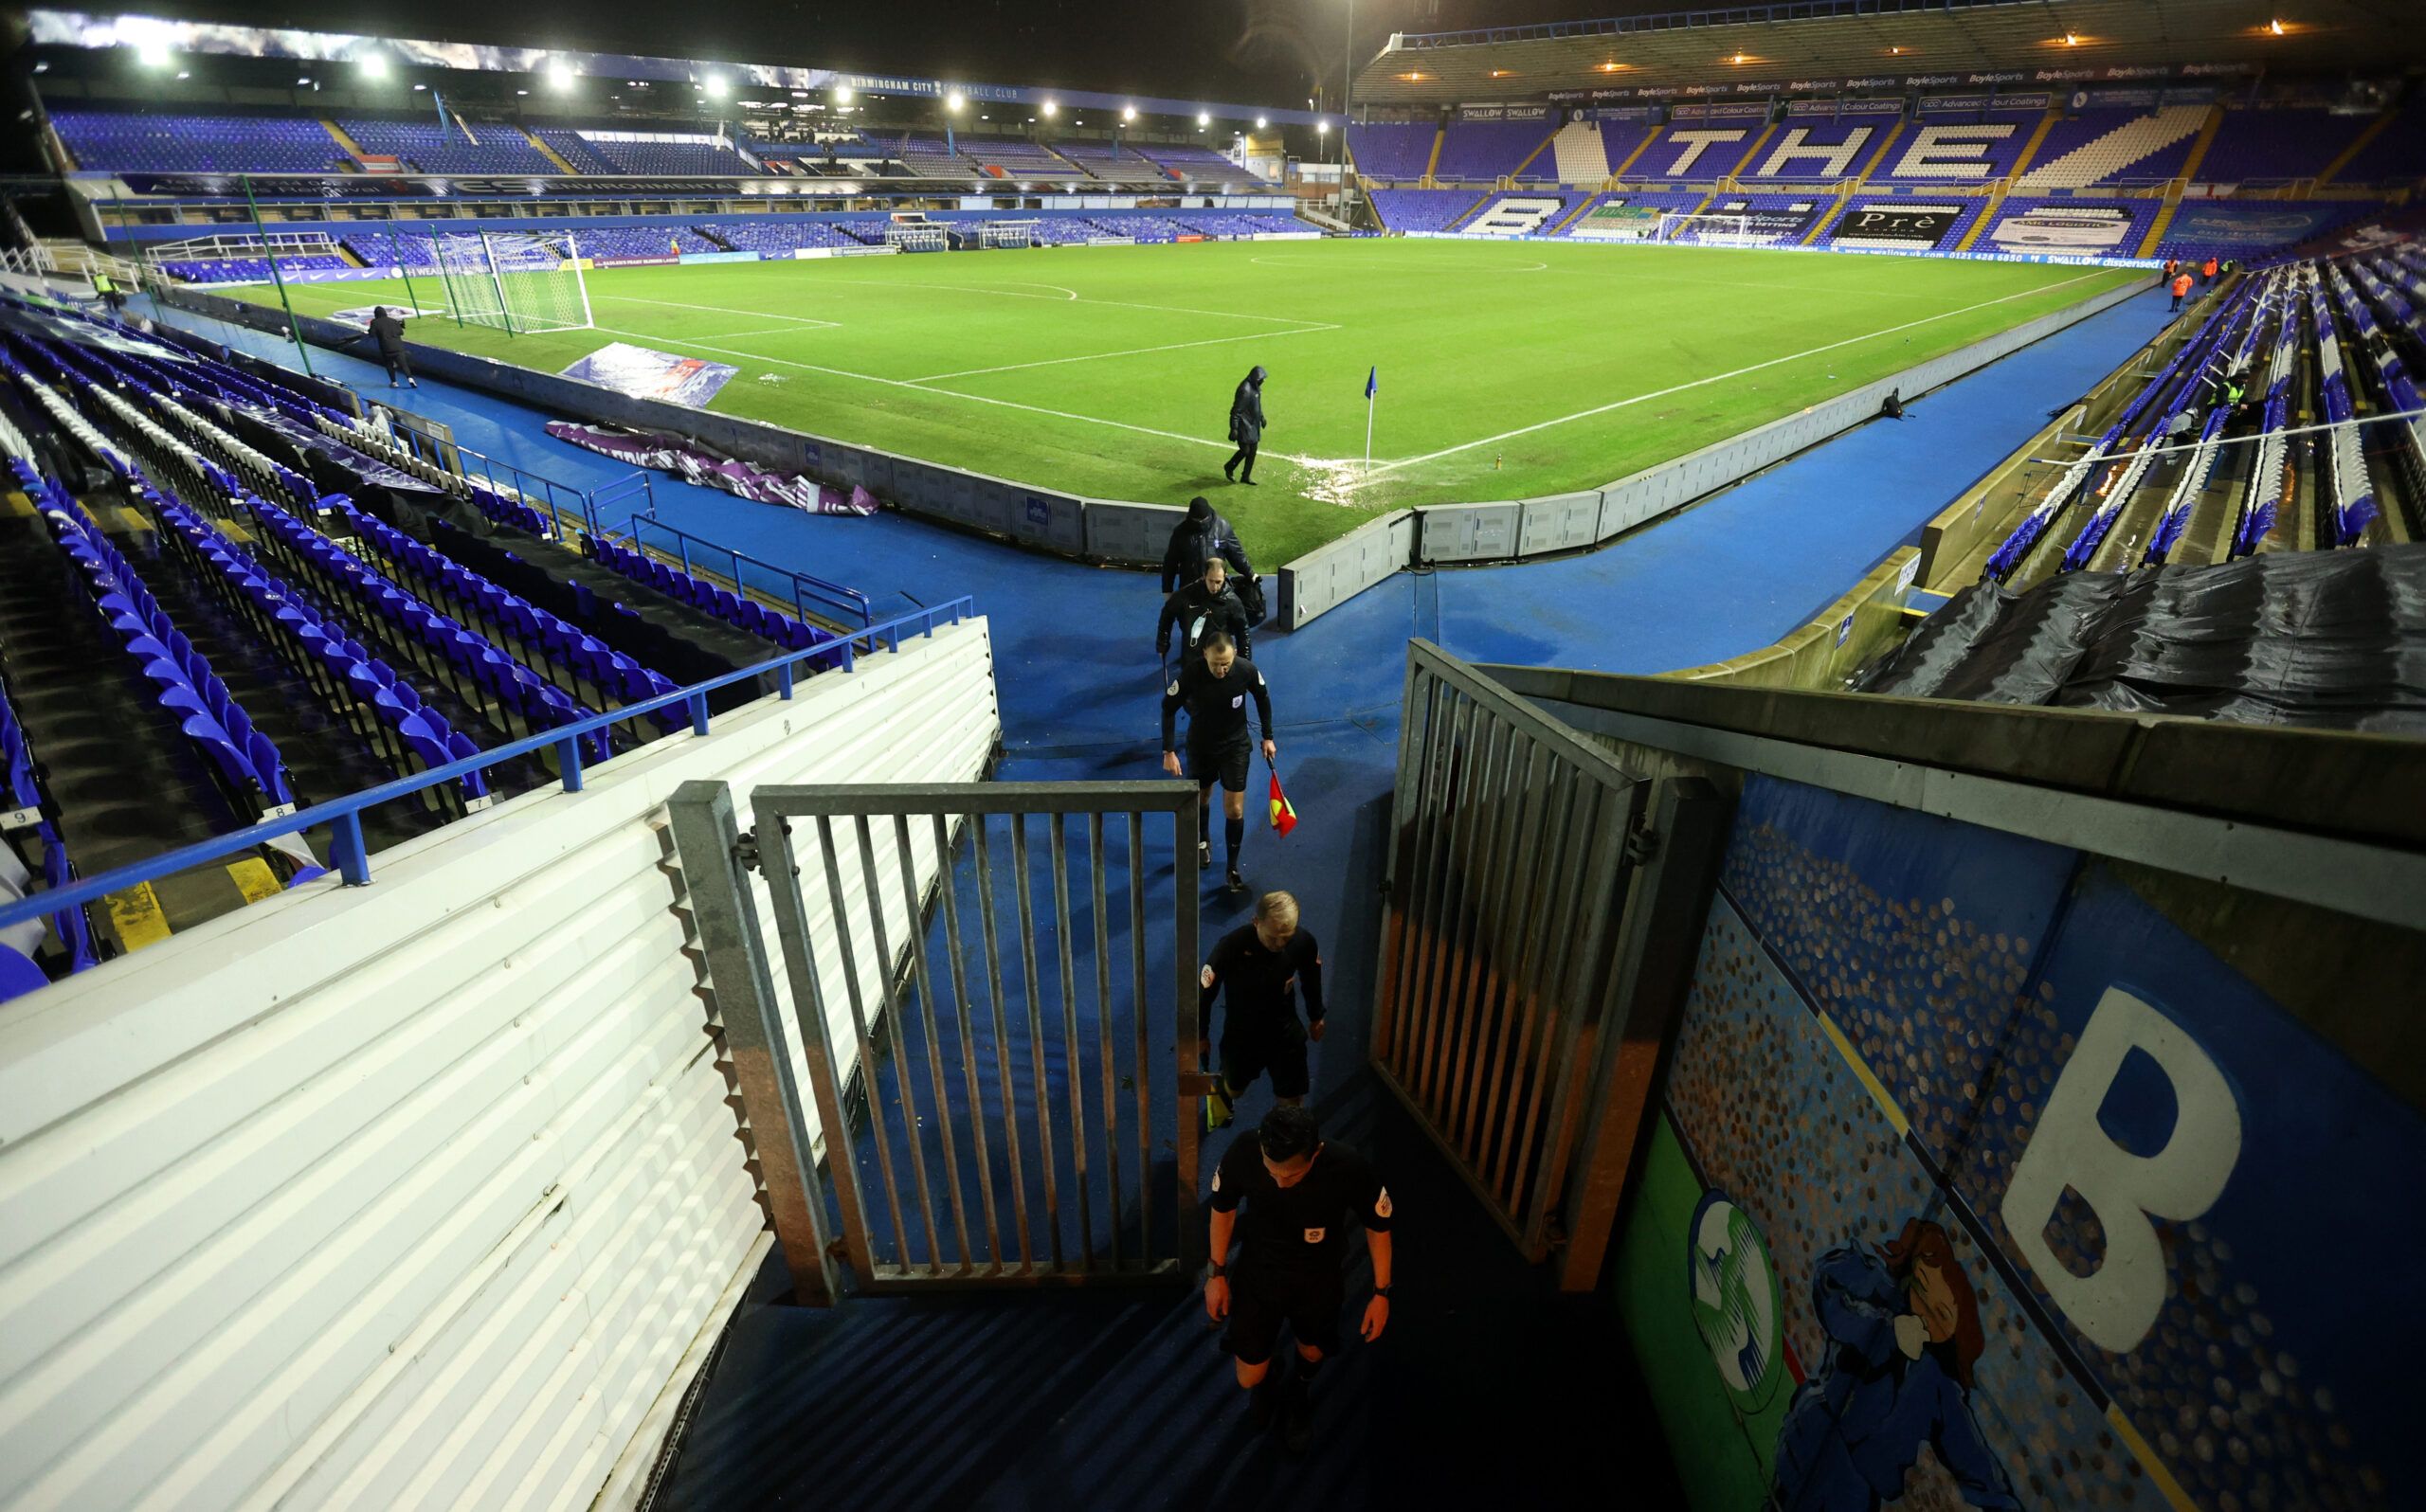 Soccer Football - Championship - Birmingham City v Preston North End - St Andrew's, Birmingham, Britain - January 20, 2021 Match officials leave the pitch at the end of the game Action Images/Carl Recine EDITORIAL USE ONLY. No use with unauthorized audio, video, data, fixture lists, club/league logos or 'live' services. Online in-match use limited to 75 images, no video emulation. No use in betting, games or single club /league/player publications.  Please contact your account representative for